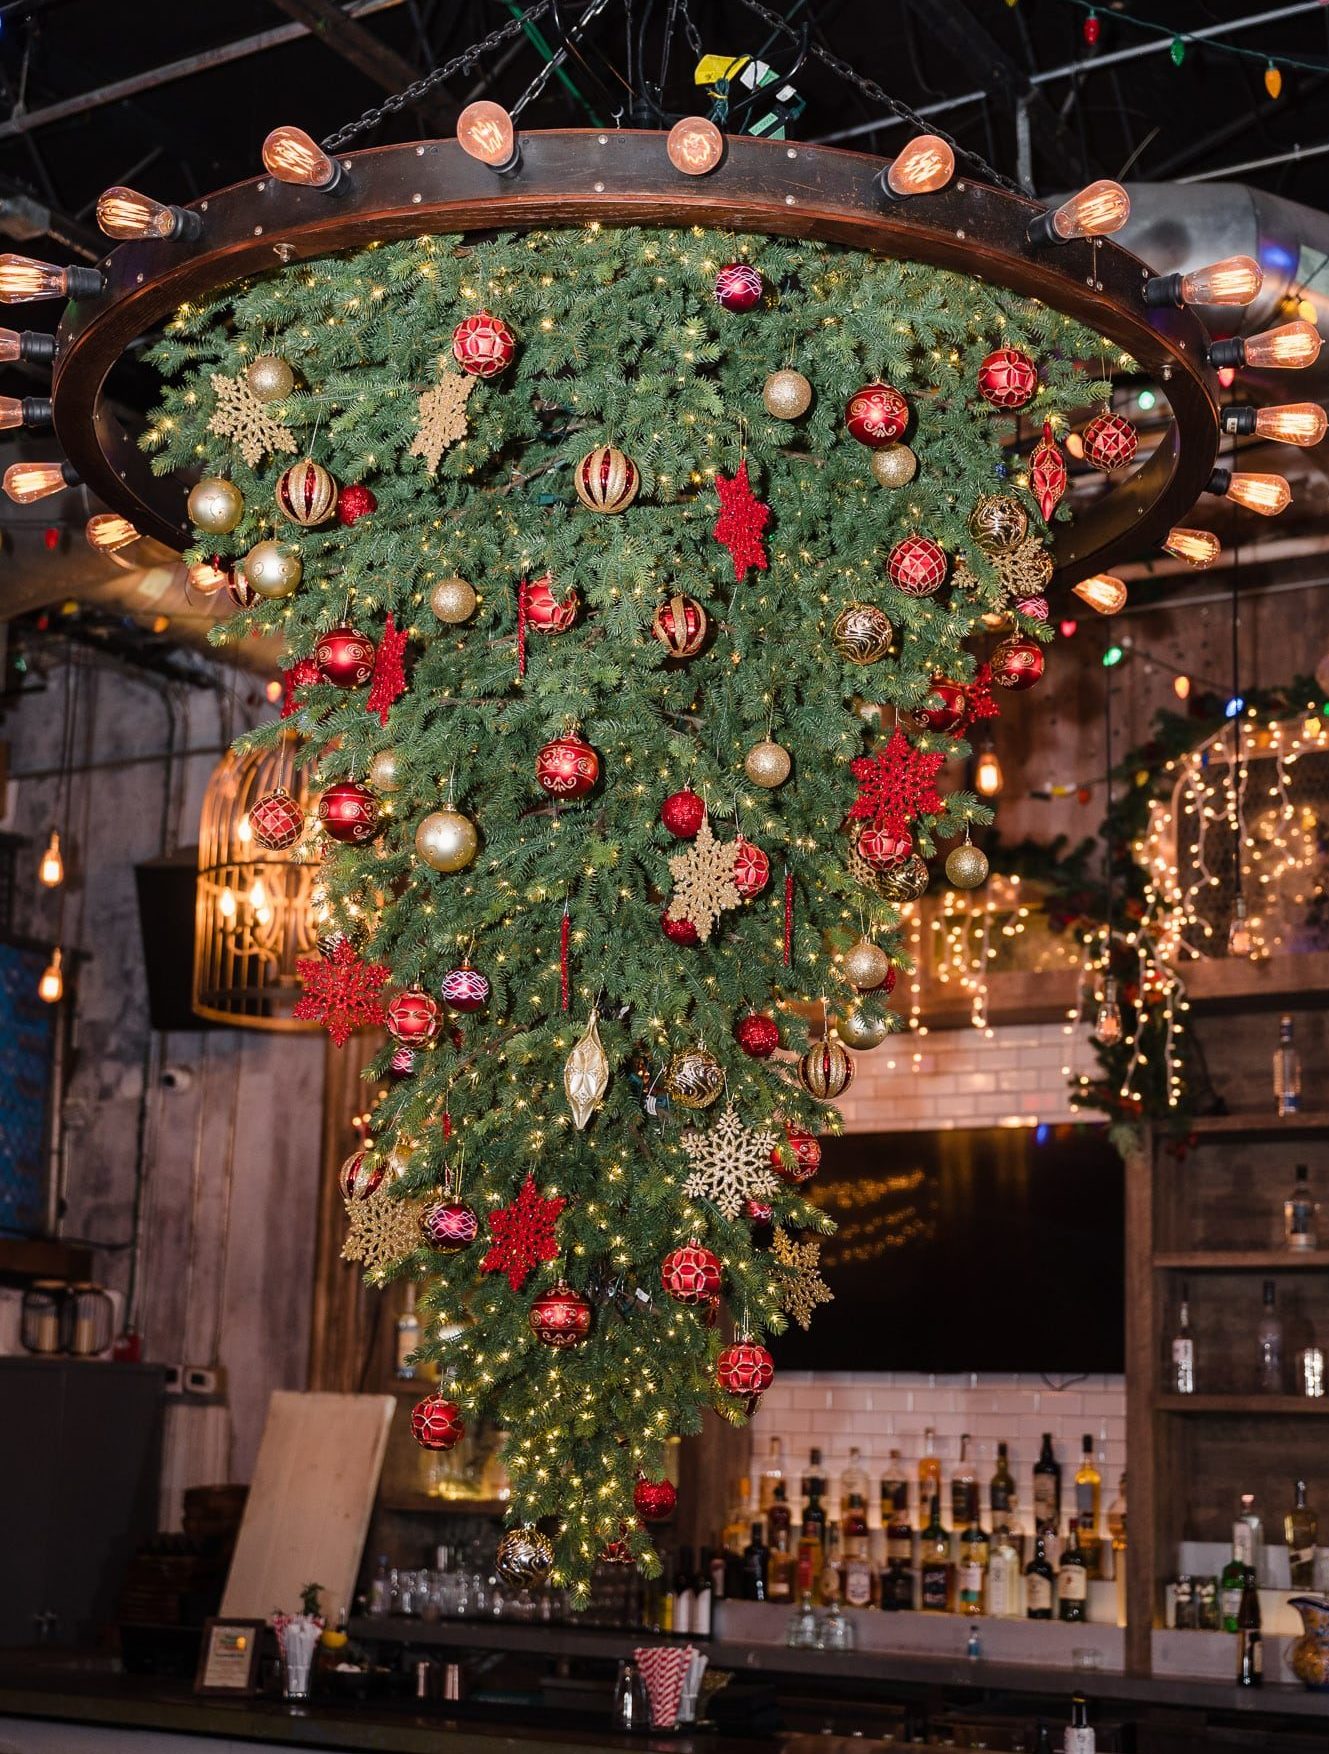 An upside down Christmas tree hanging from the Bodega chandelier